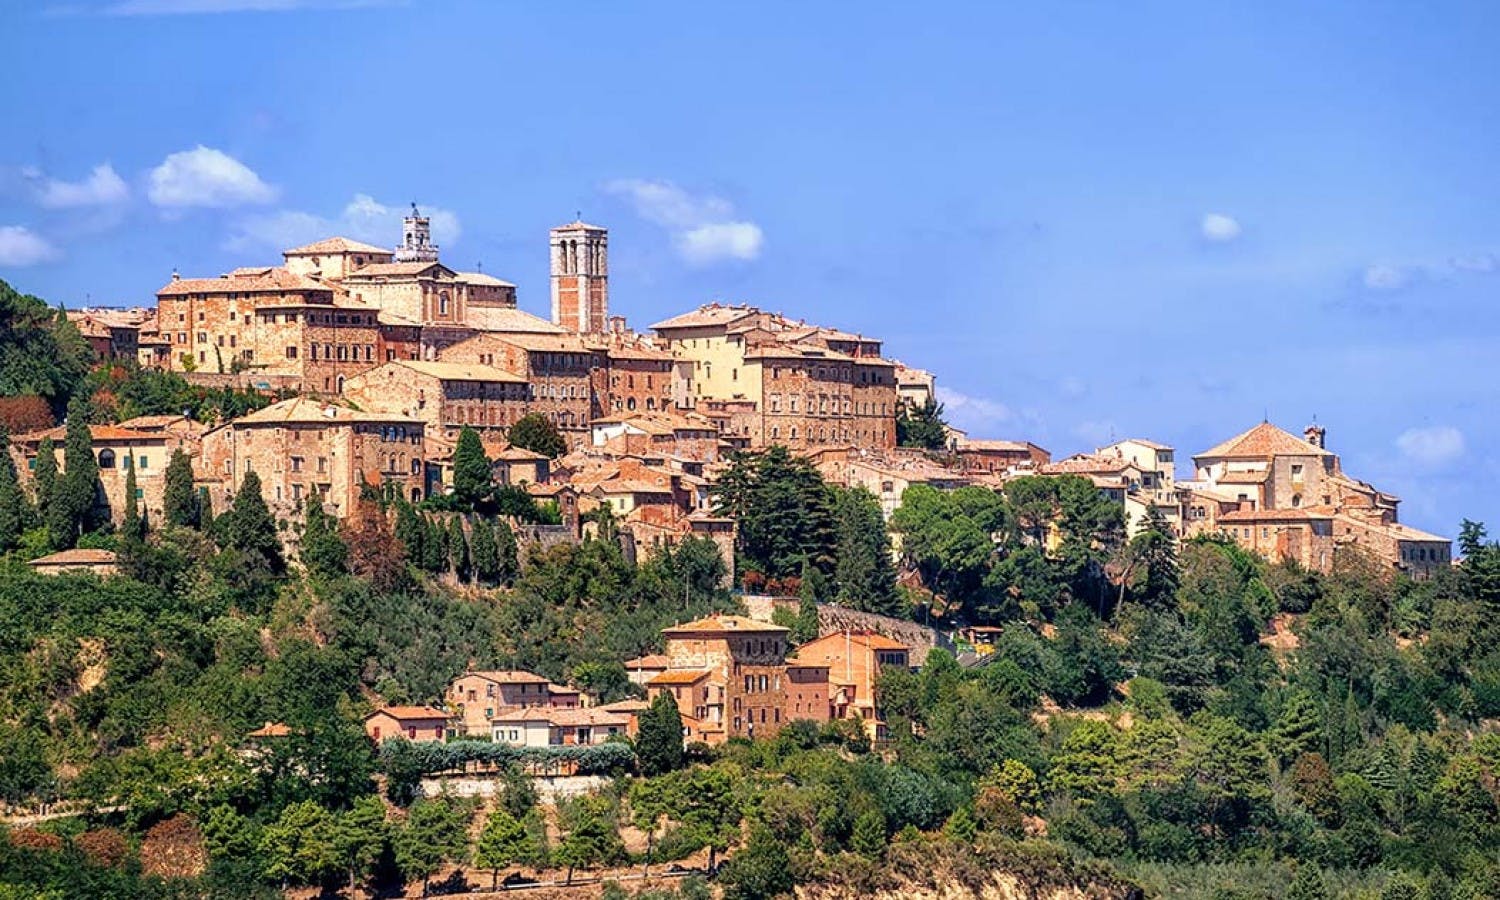 San Gimignano, Chianti and Montalcino tour from Siena with wine tasting and light lunch-2